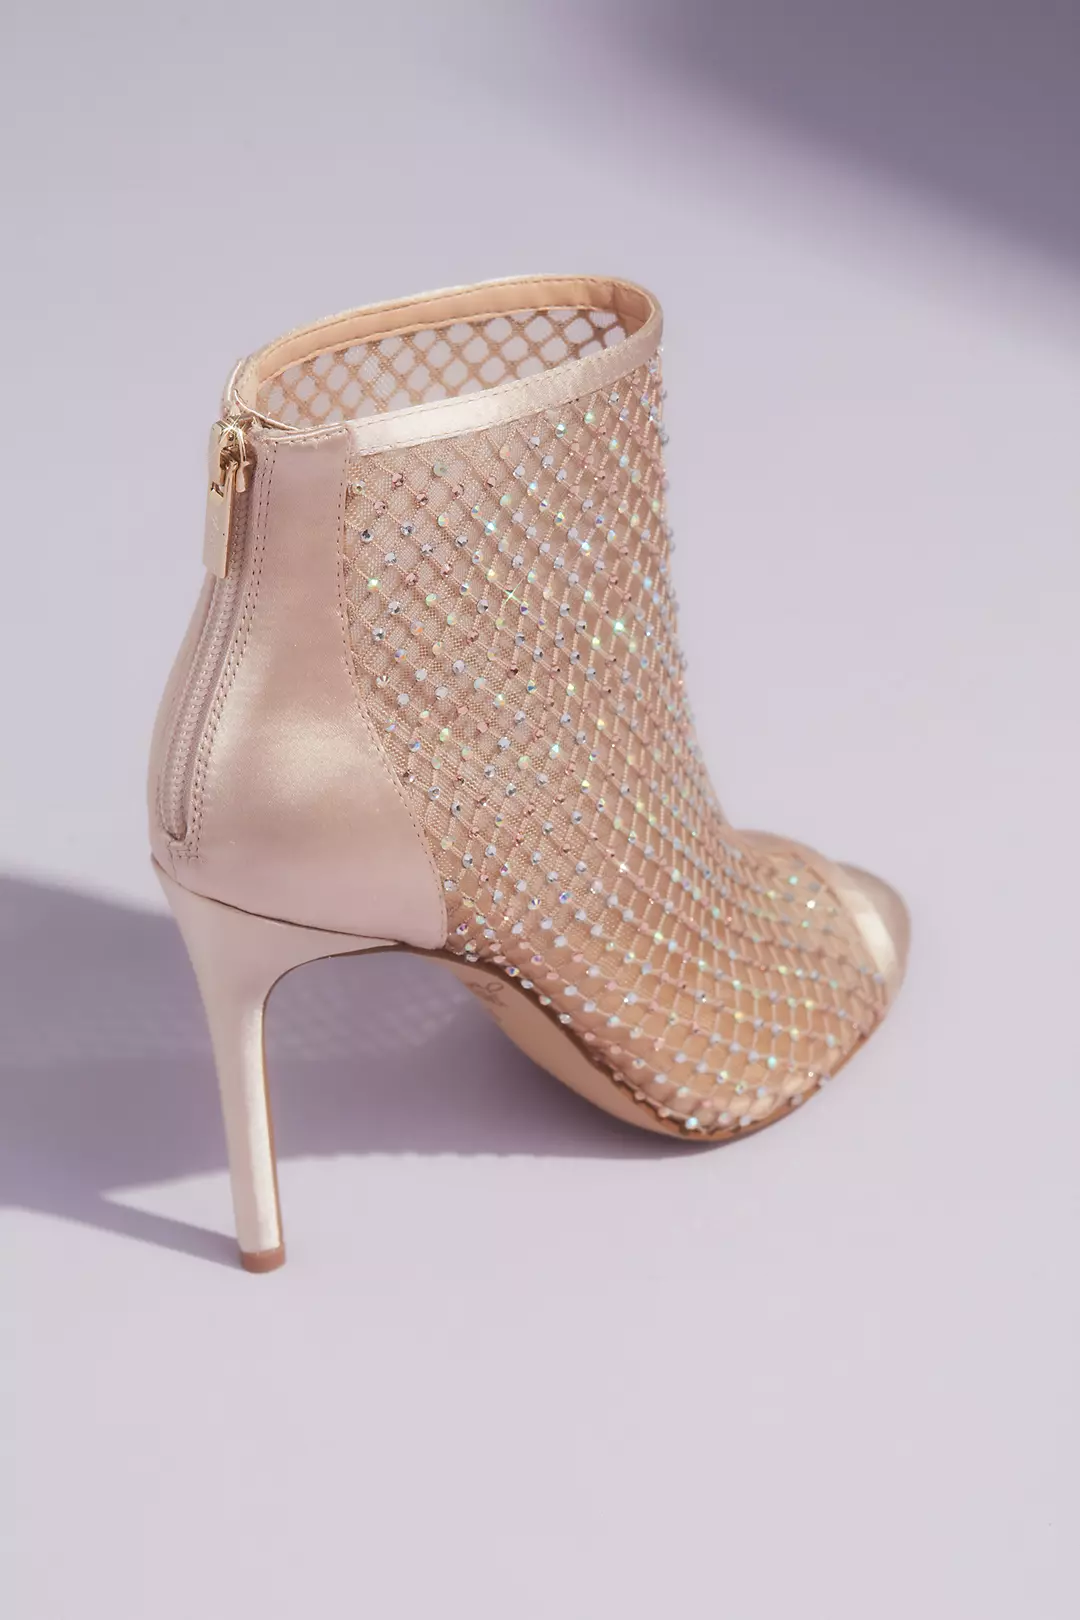 Metallic Illusion Open Toe Booties with Crystals Image 2